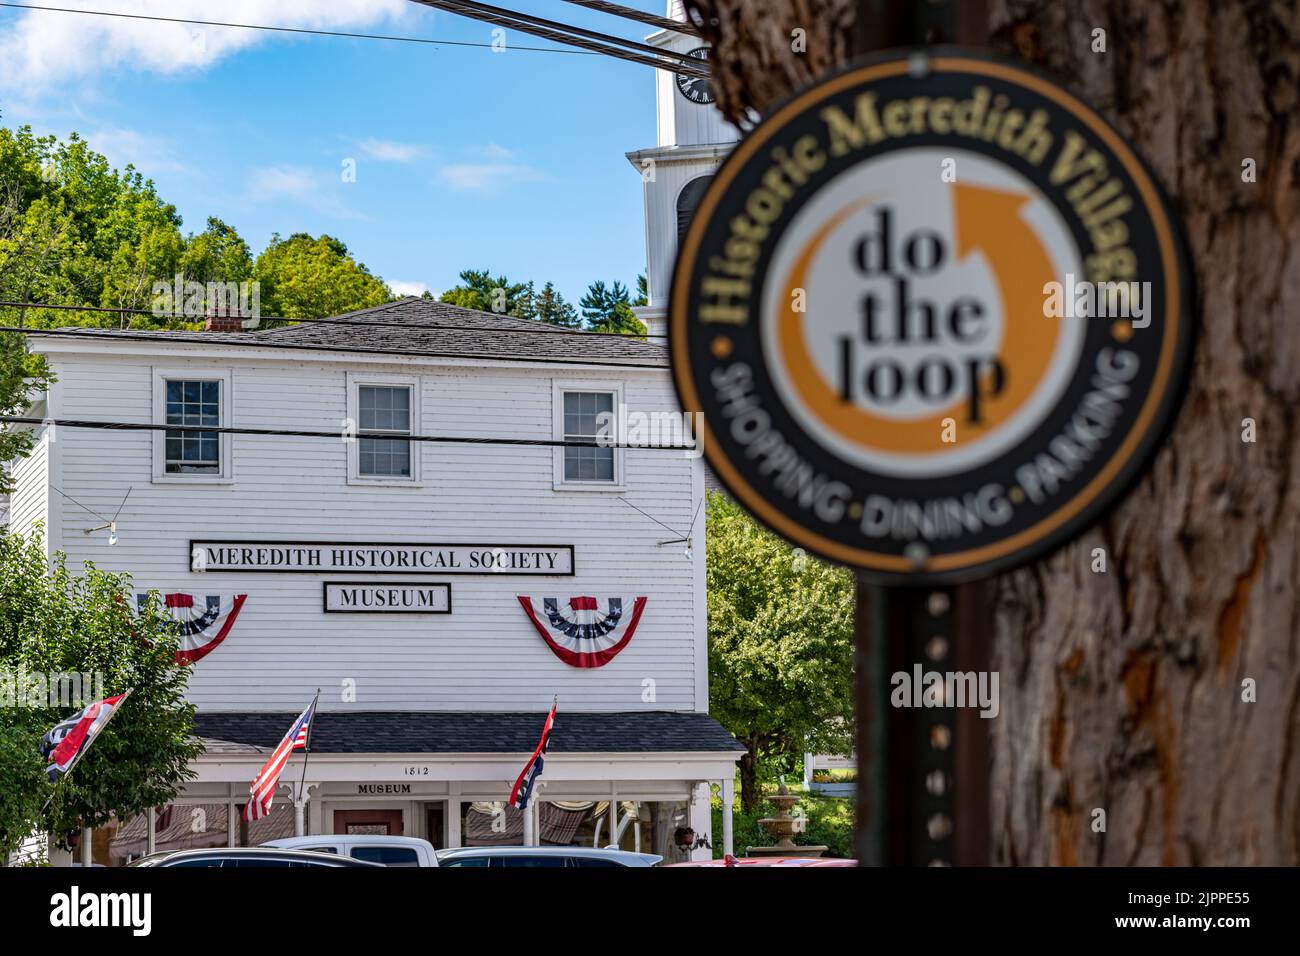 Das Meredith Historical Society Museum an der Main Street in Meredith, New Hampshire. Stockfoto